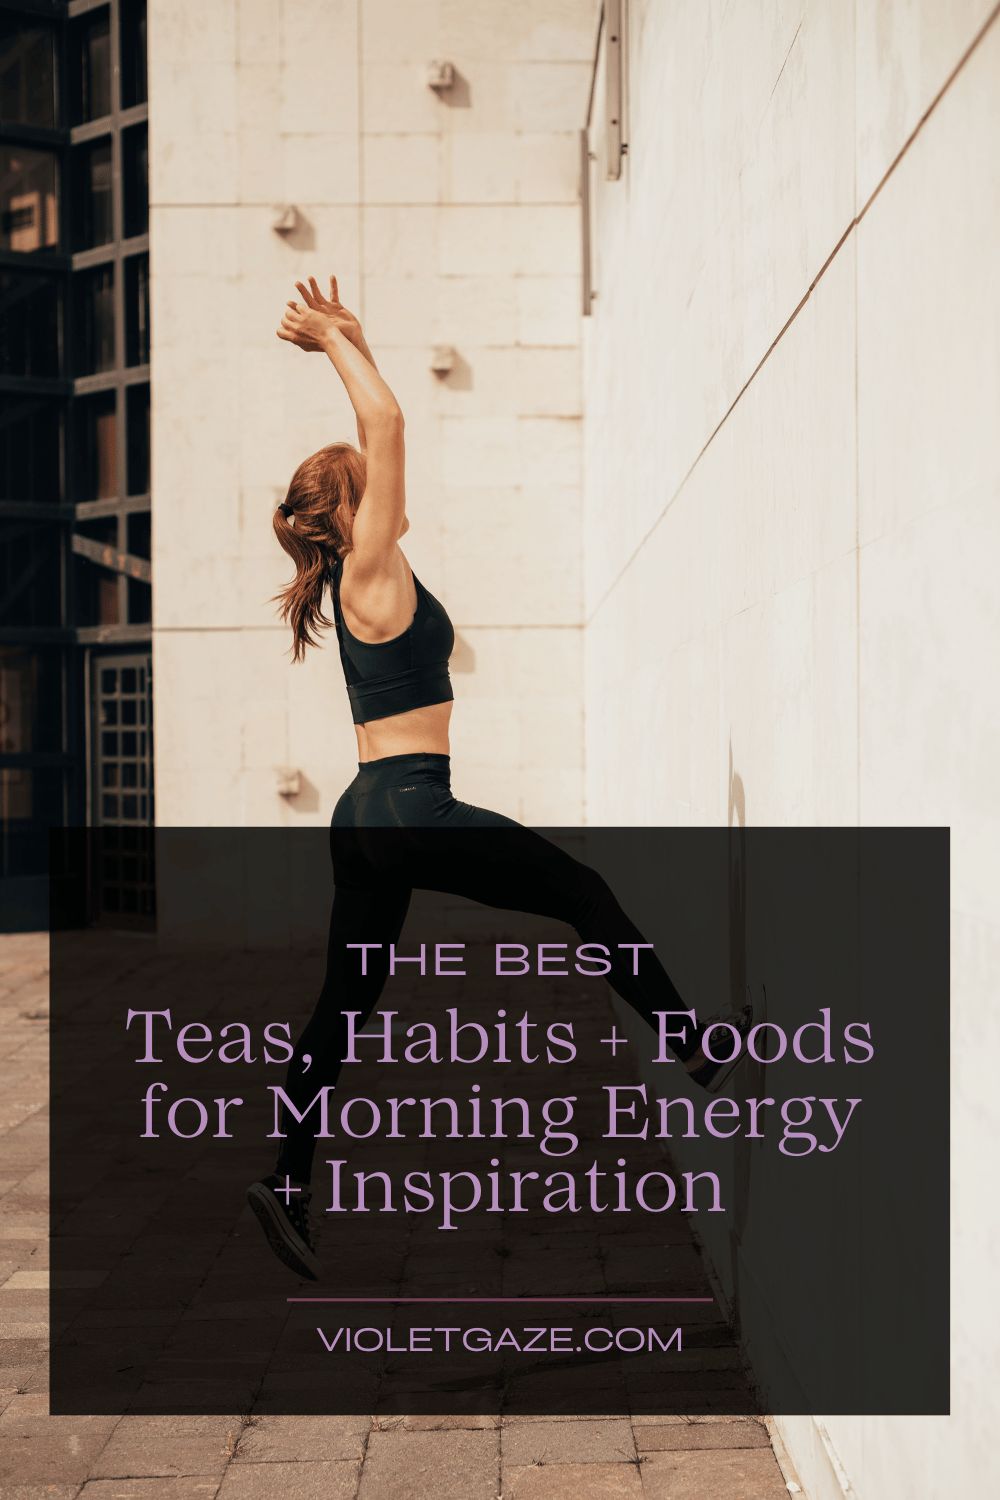 infographic saying the Best Teas, Habits + Foods for Morning Energy + Inspiration with a woman stretching outside in black workout leggings and bra